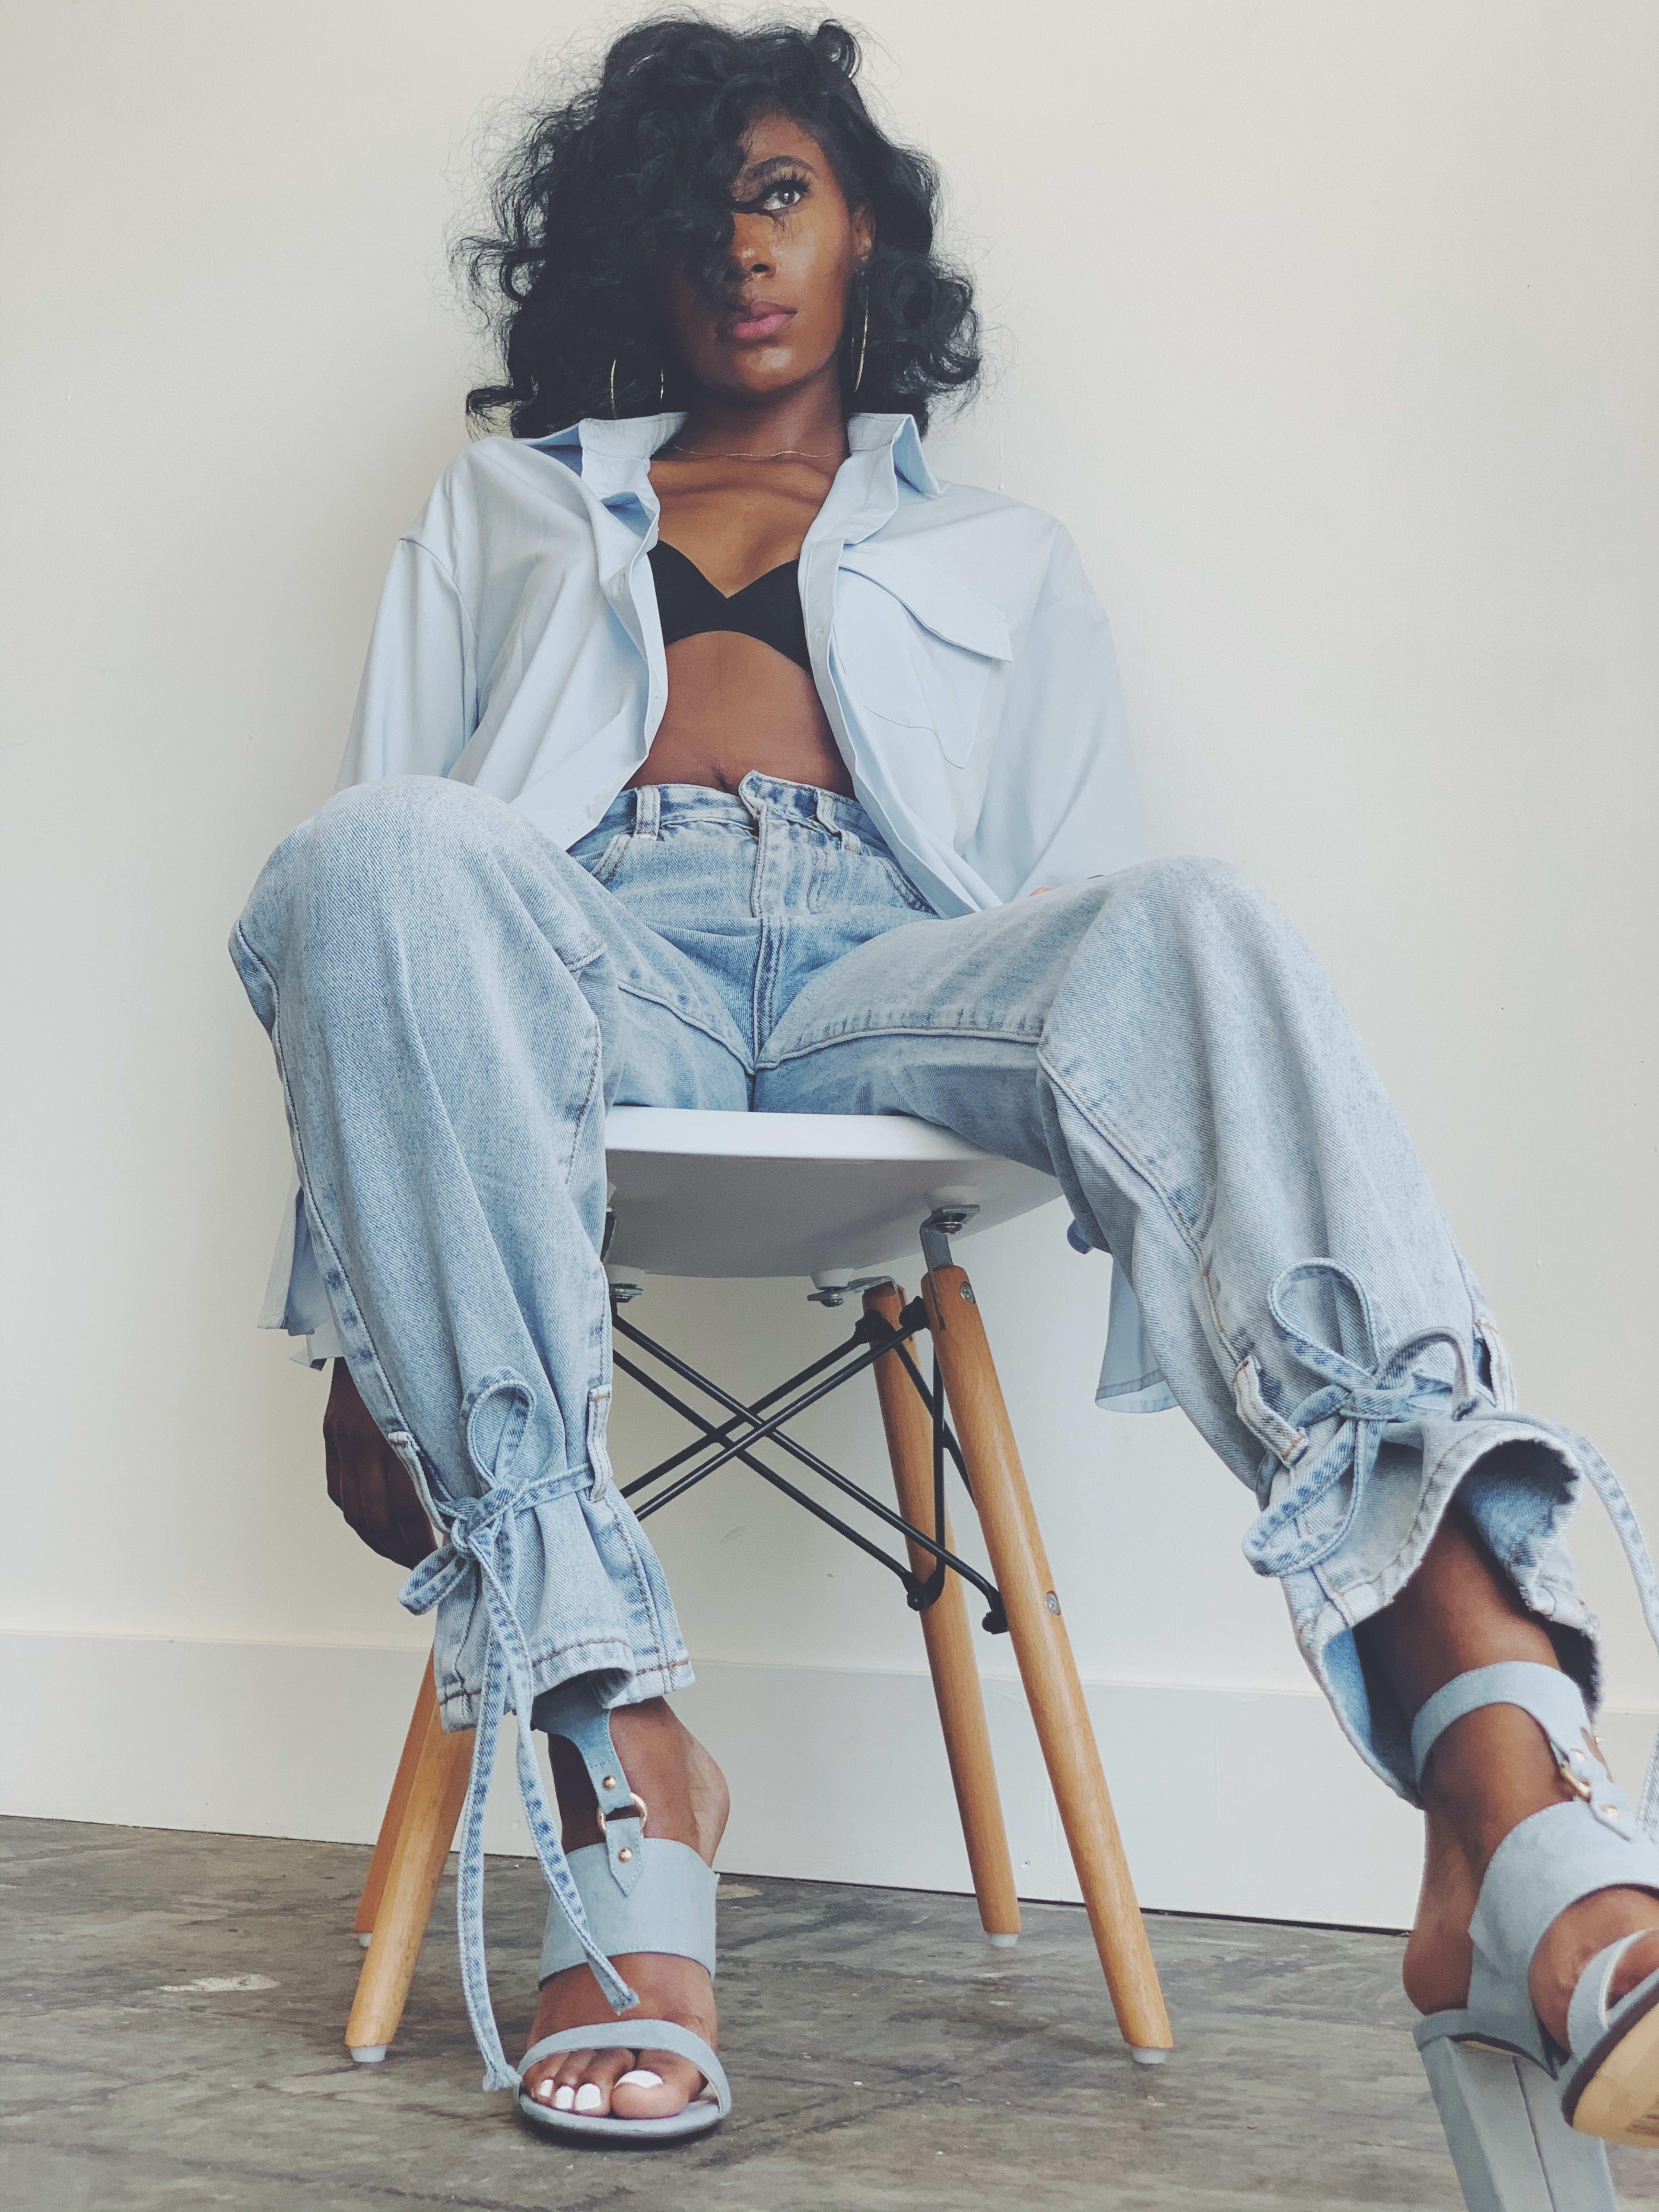 A woman in jeans and a baby blue button up posing on a white chair during a 1990s themed photo shoot.